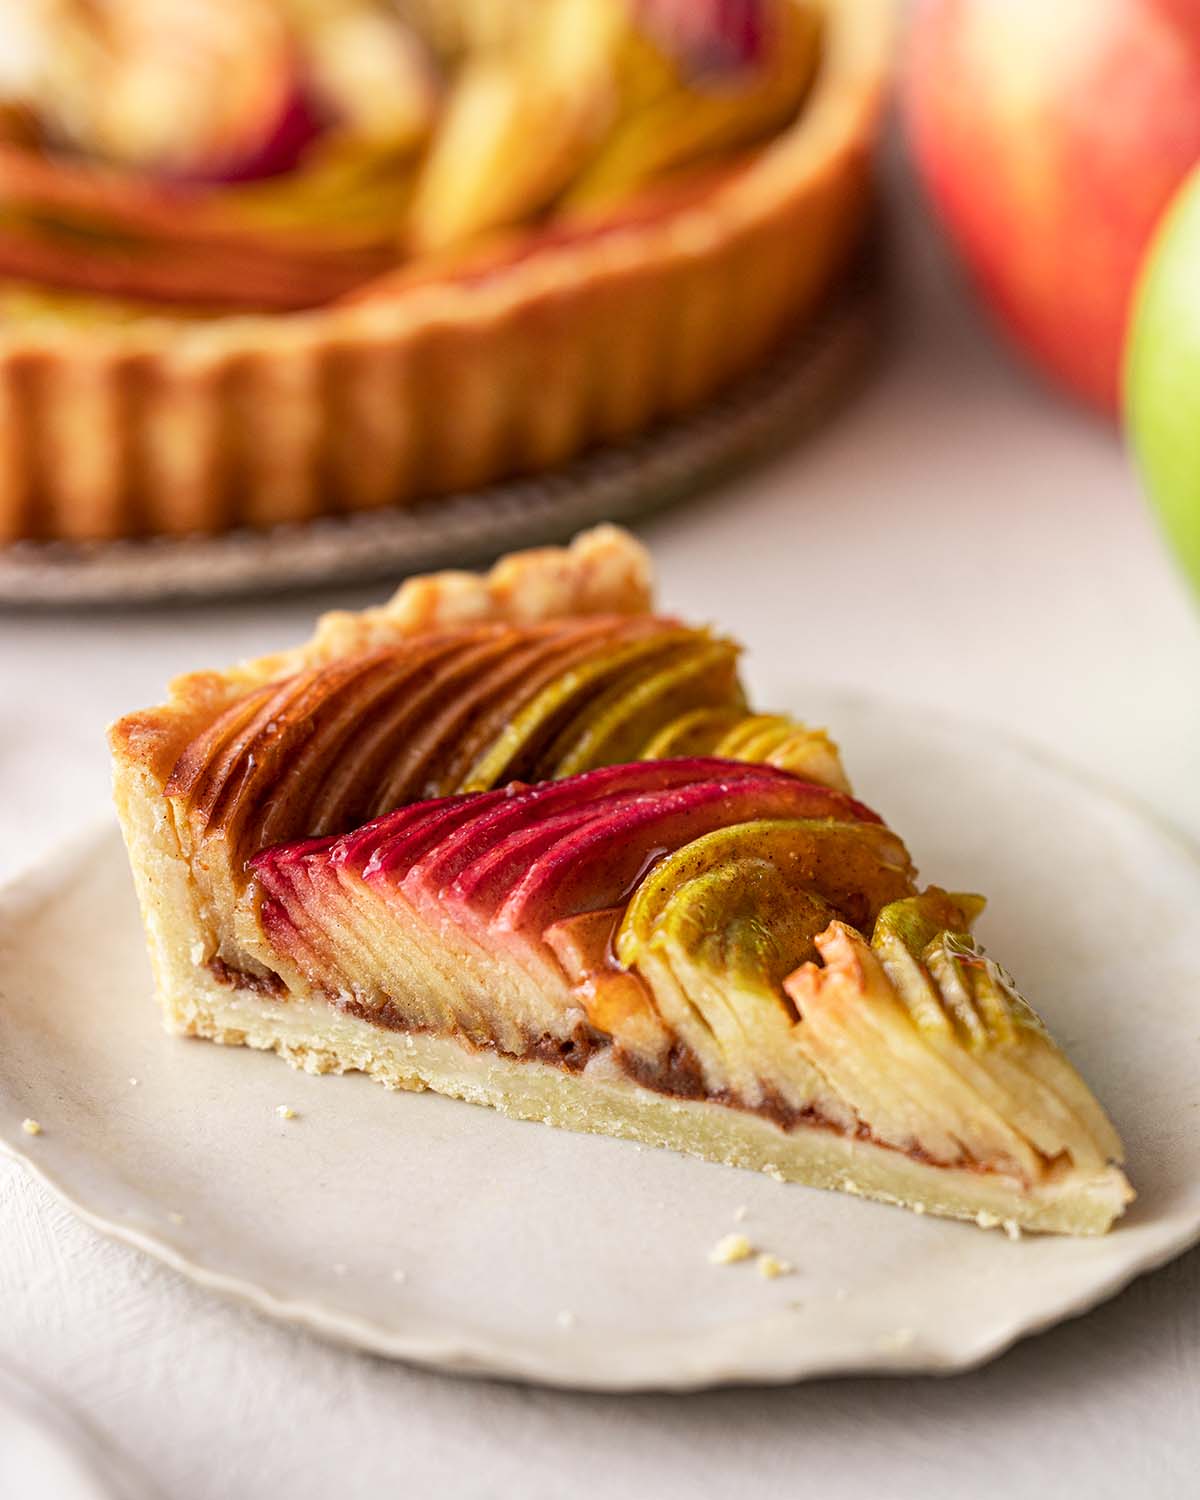 Individual slice of apple tart revealing layers of apple slices.